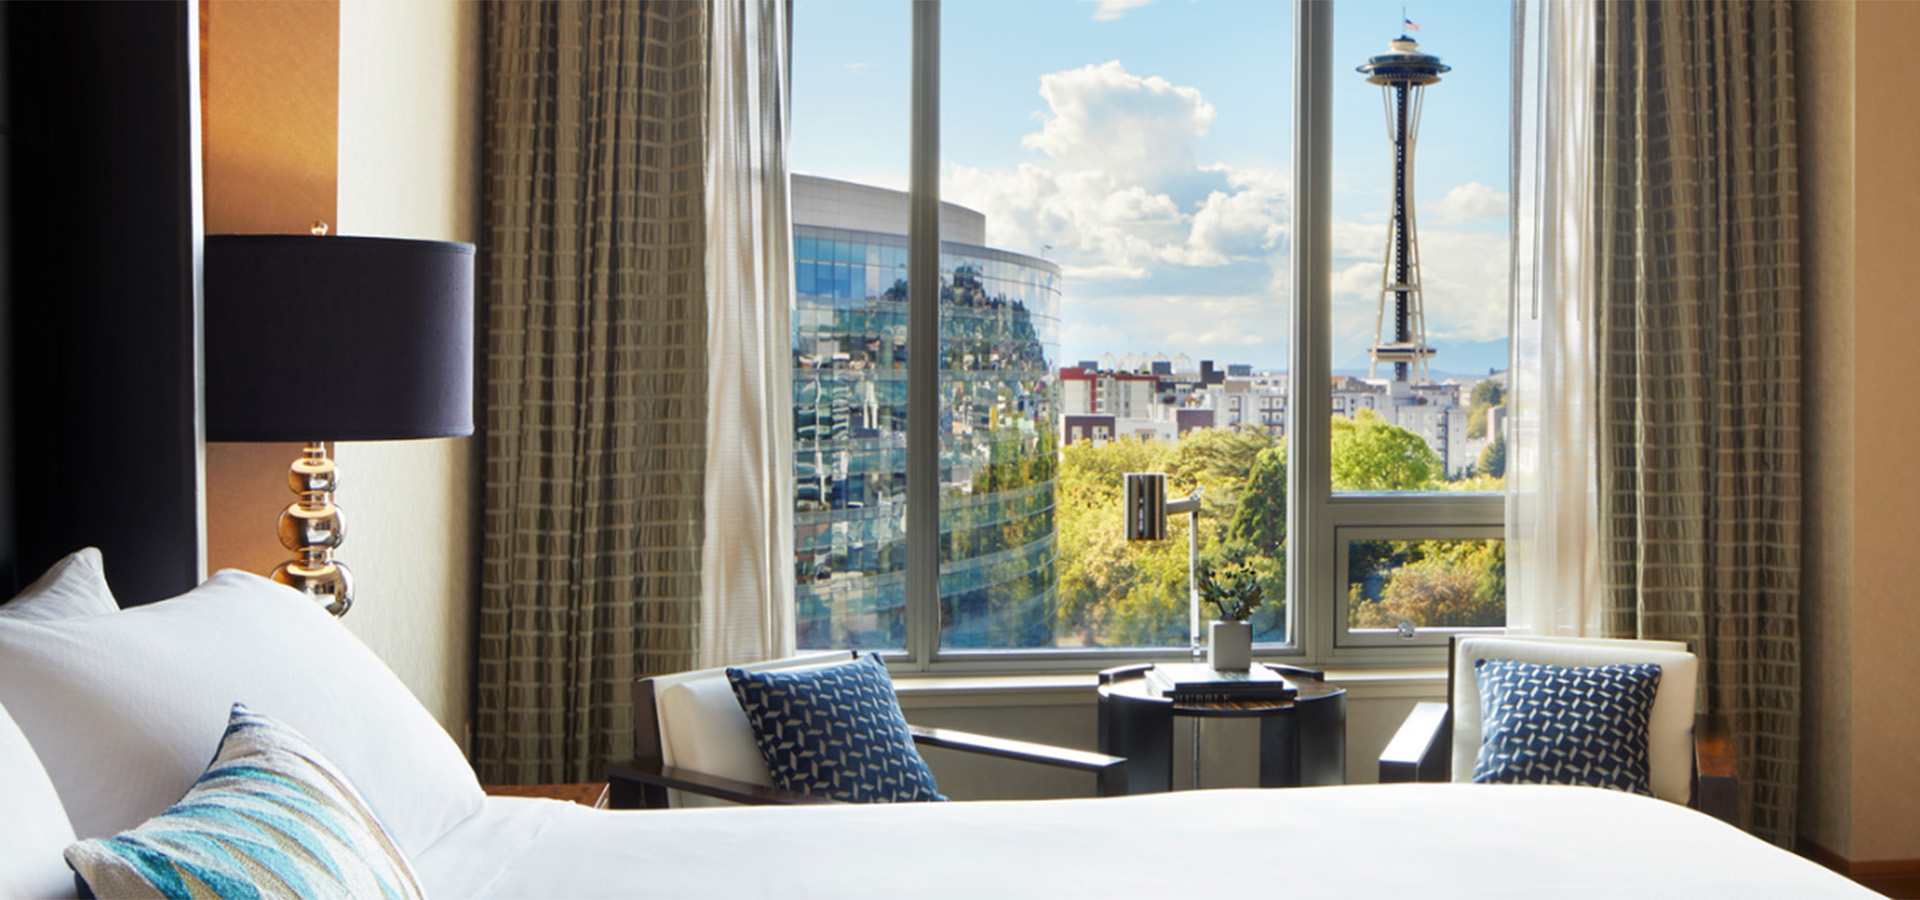 Image of Pan Pacific hotel room with view of Space Needle